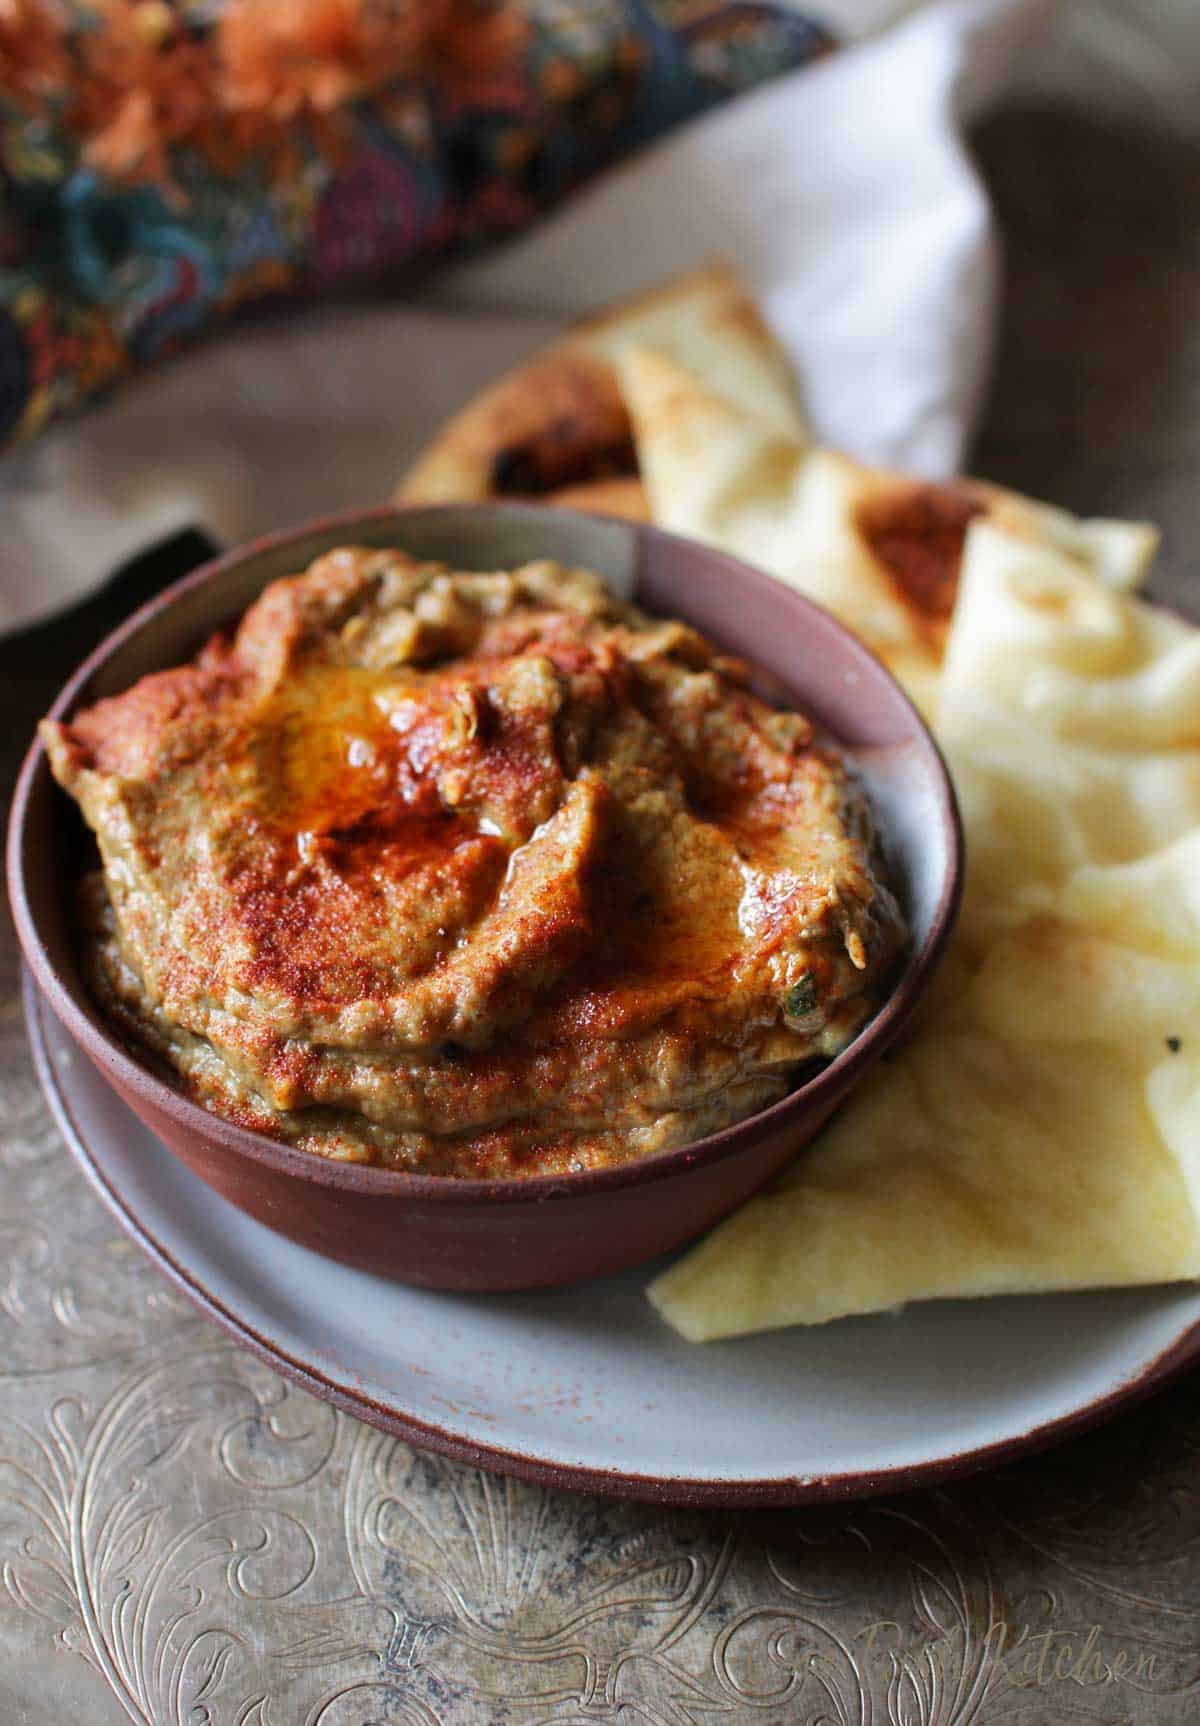 A bowl of baba ganoush plated with slices of pita bread